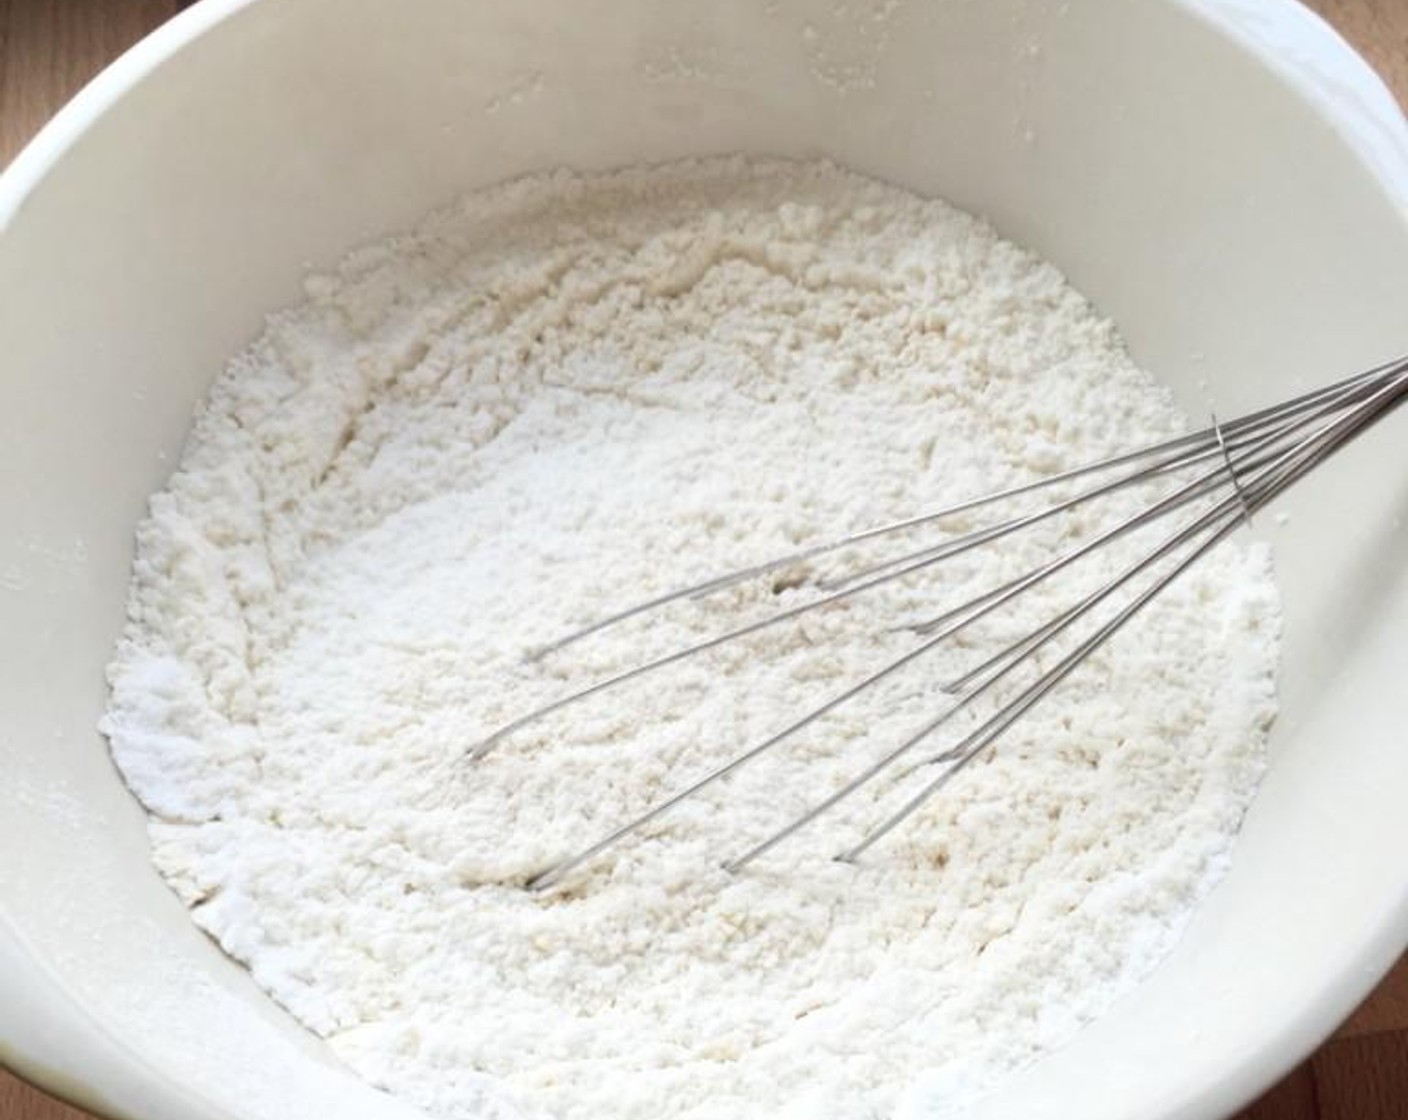 step 3 Add All-Purpose Flour (3 cups), Corn Starch (1/2 cup), and sifted Powdered Confectioners Sugar (1/3 cup) into a large mixing bowl.